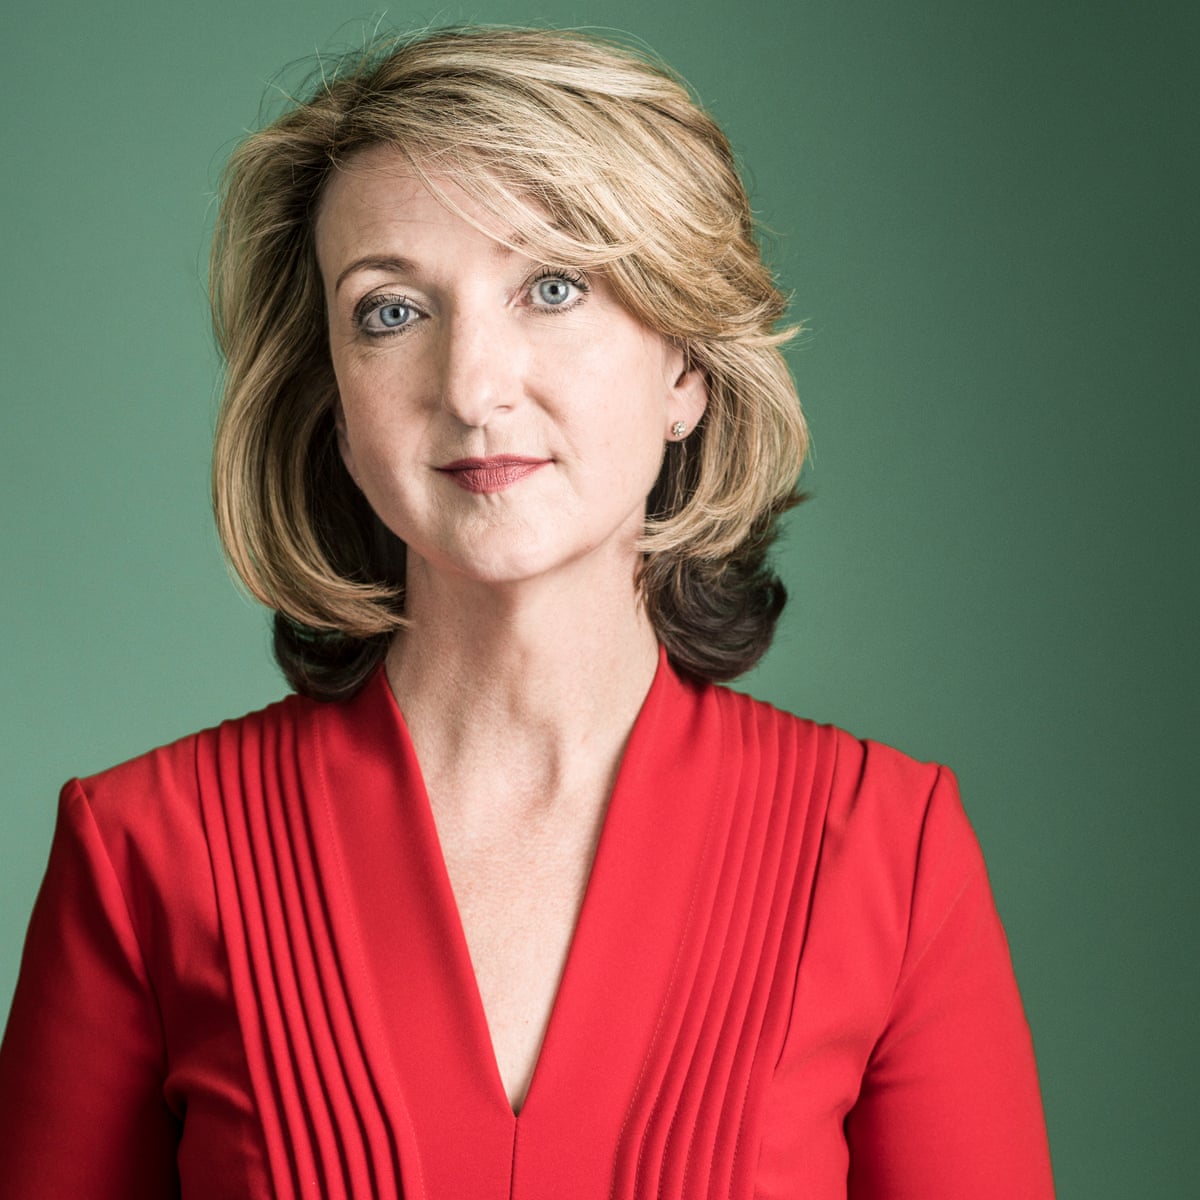 BBC facing backlash over decision to axe Victoria Derbyshire show | Media |  The Guardian